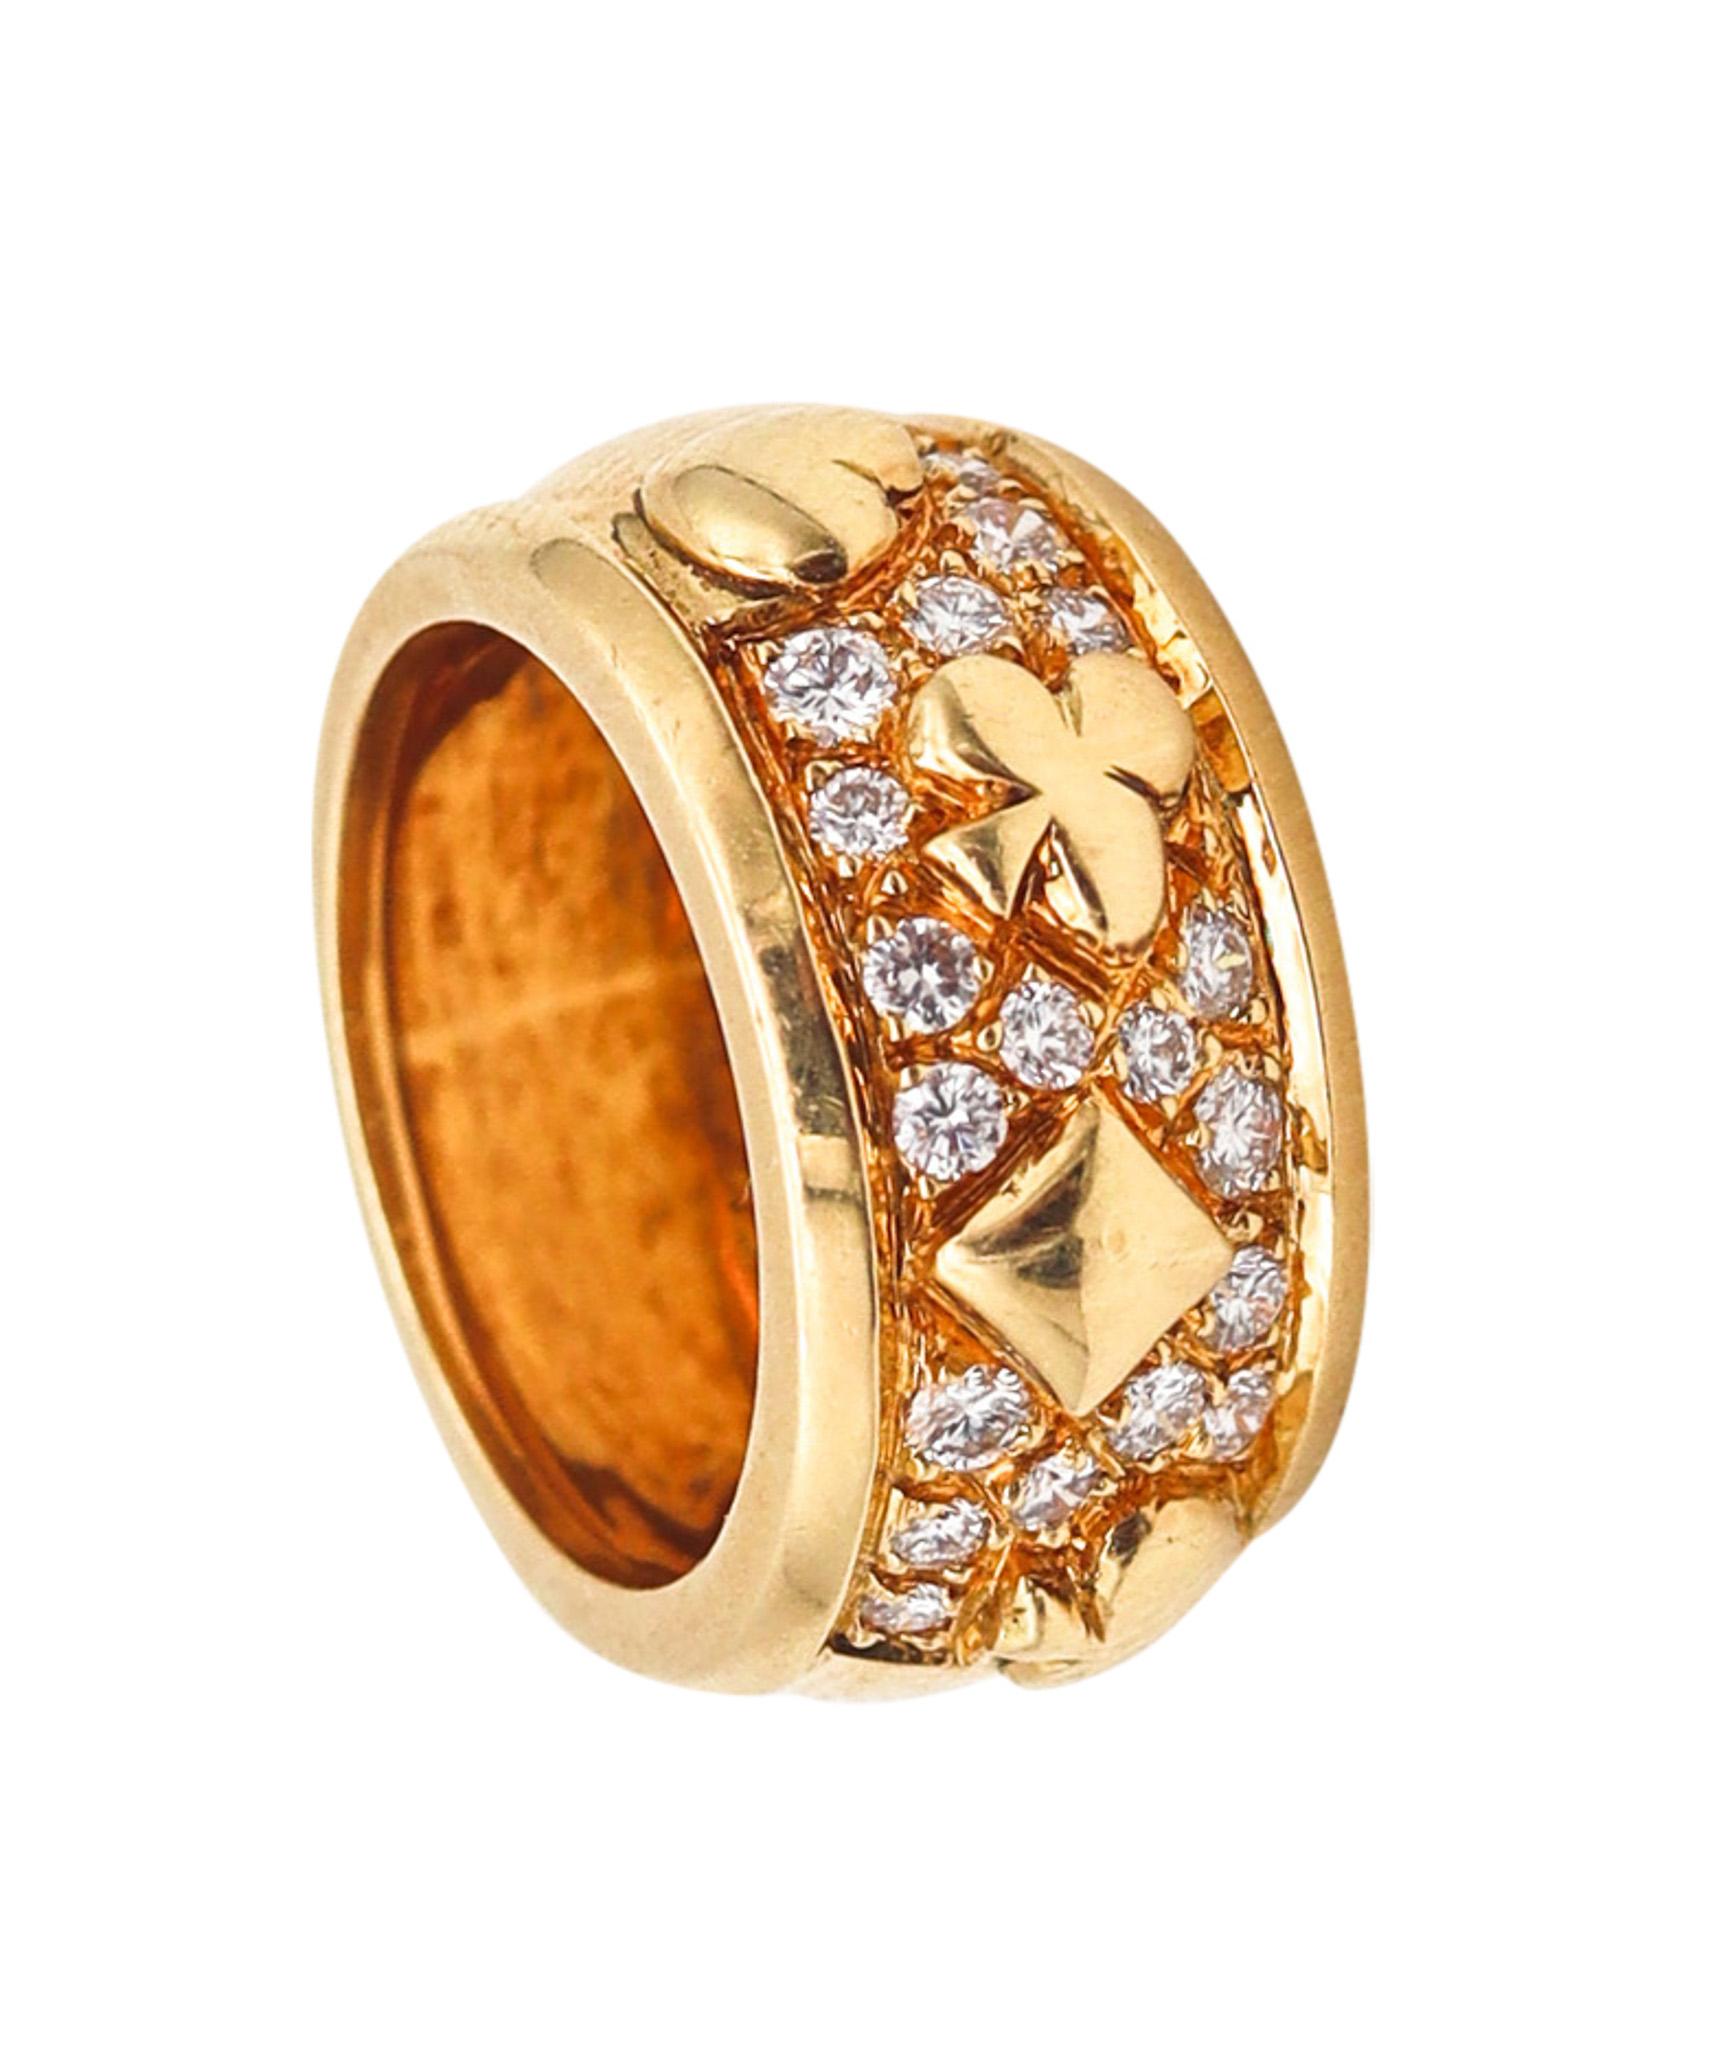 Marchak Paris Casino Motifs Band Ring In 18Kt Yellow Gold With VS Diamonds